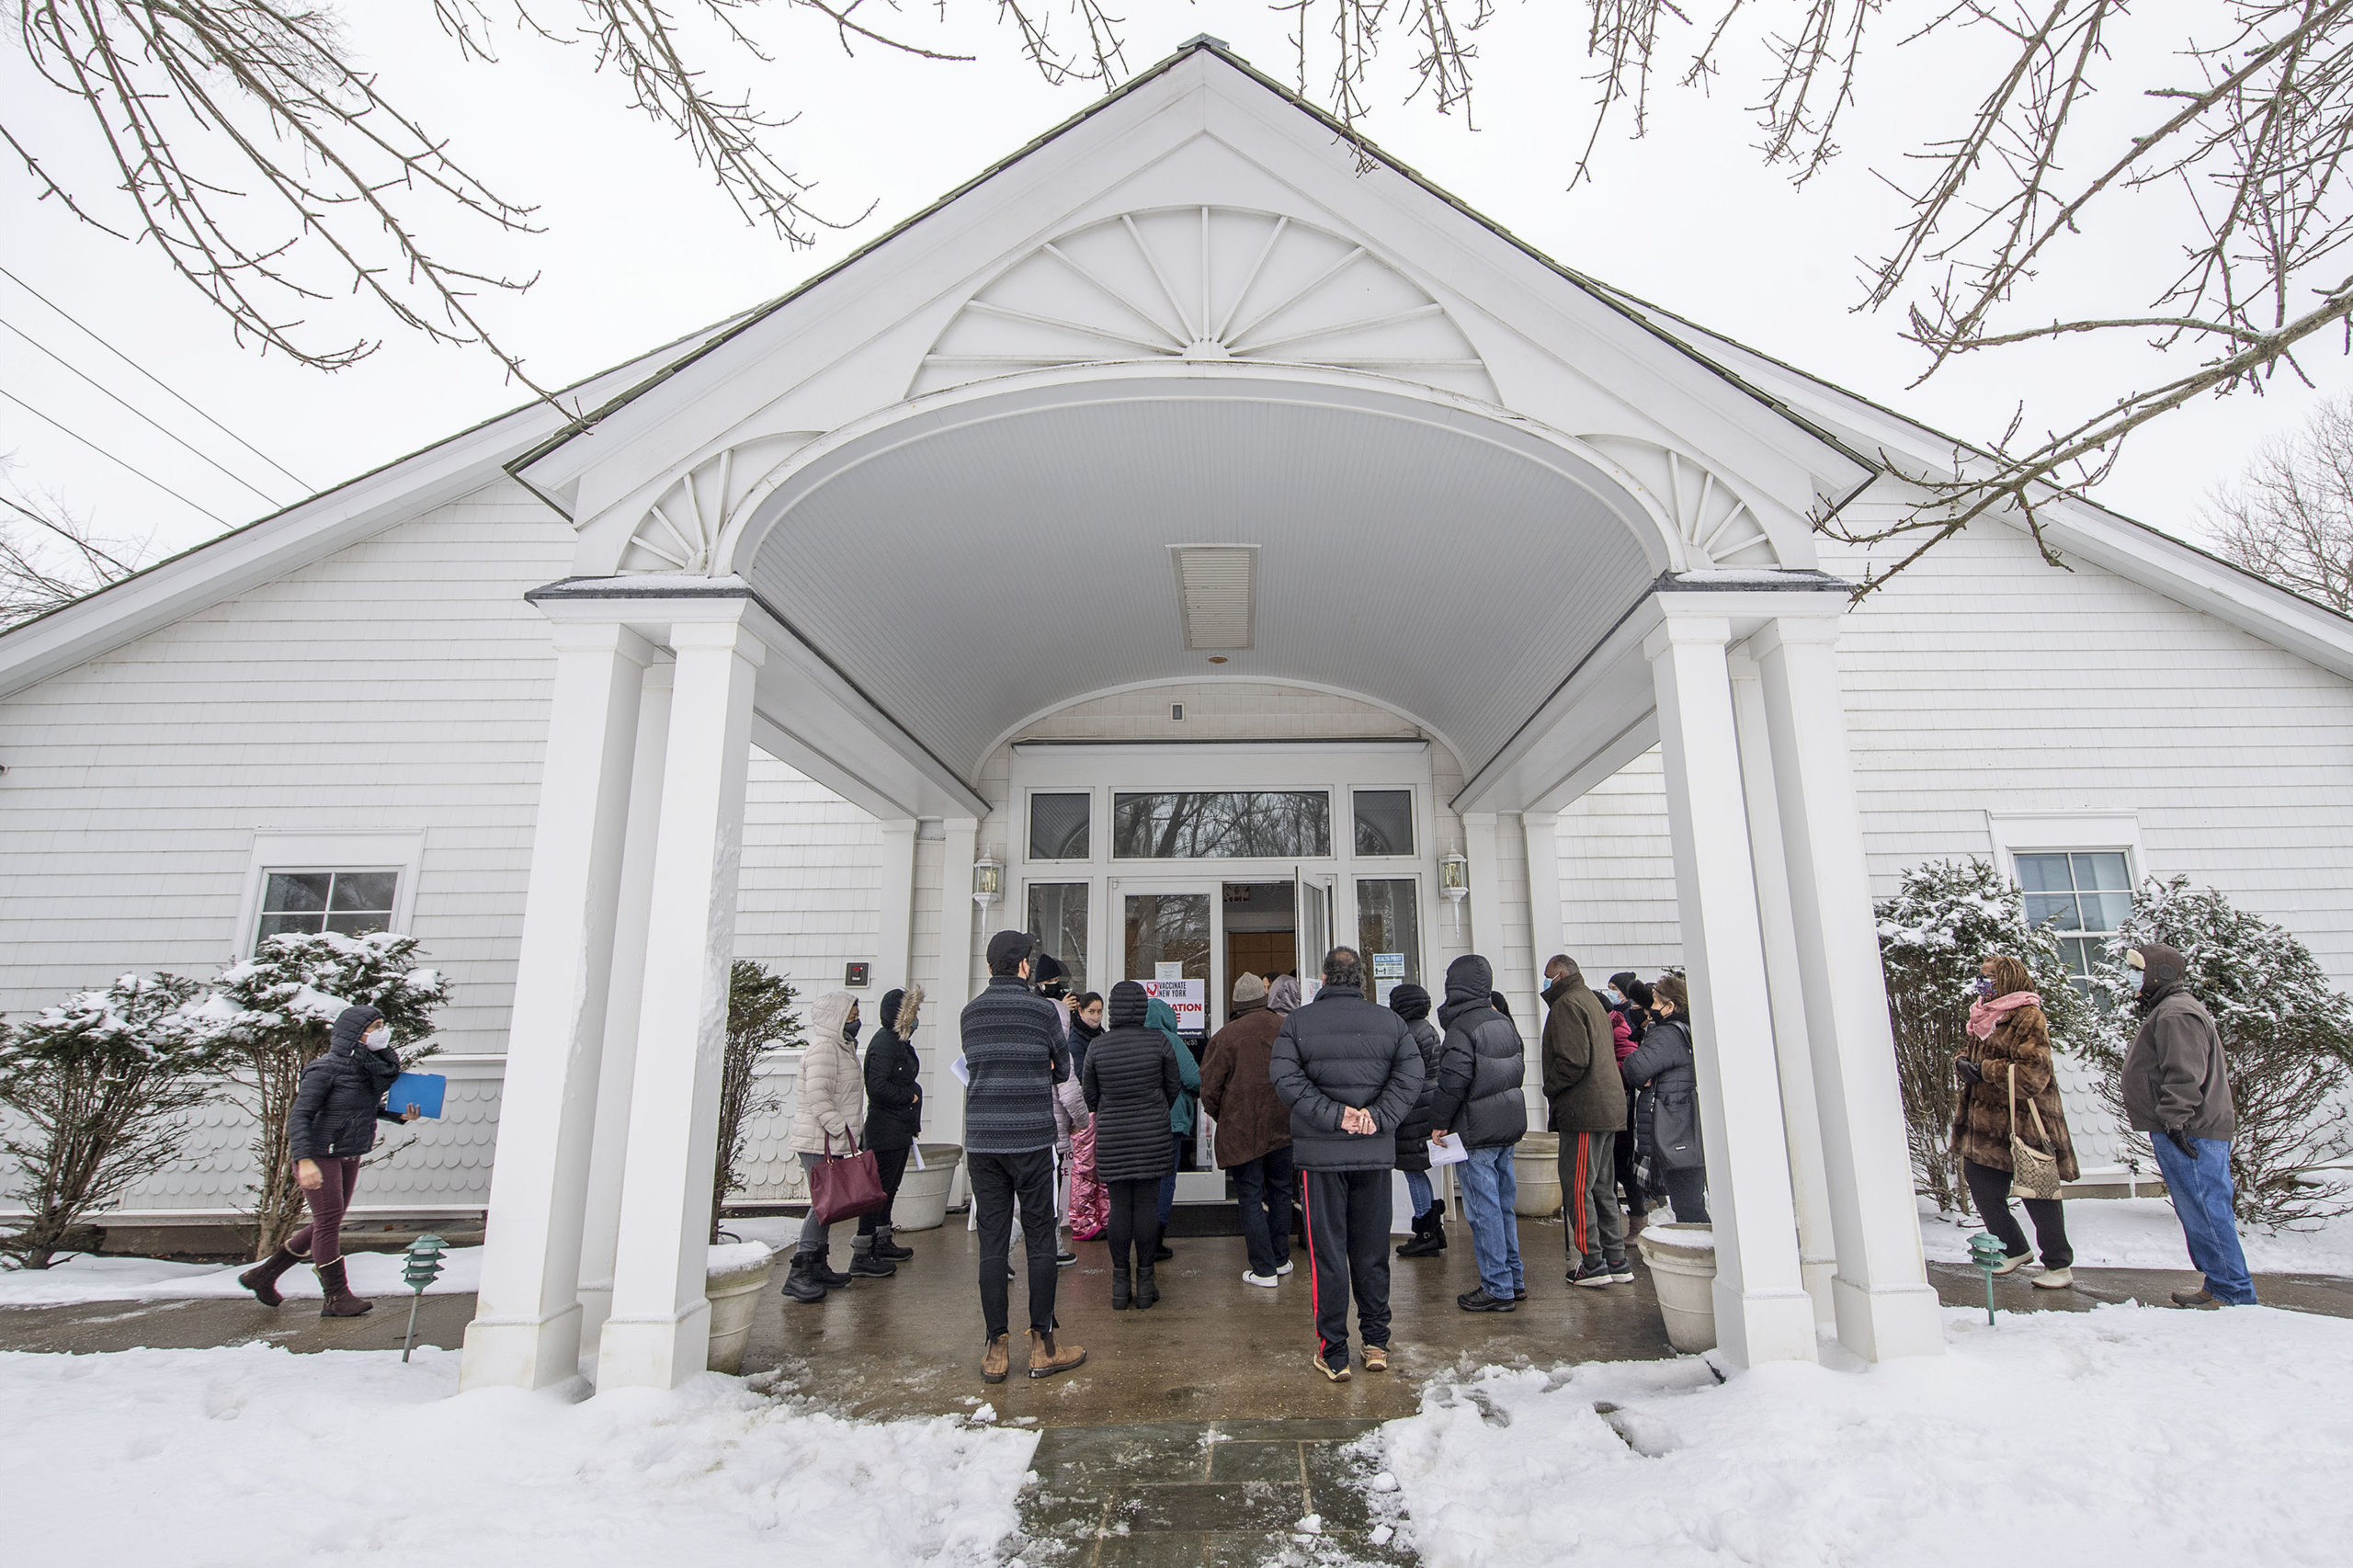 A crowd of people with appointments waits outside the hall during a COVID-19 vaccine POD (Pop Up Dispensary) organized by OLA (Organización Latino-Americana) in the Ryan Dempsey Parrish Hall of the Most Holy Trinity Church in East Hampton on Friday.    MICHAEL HELLER